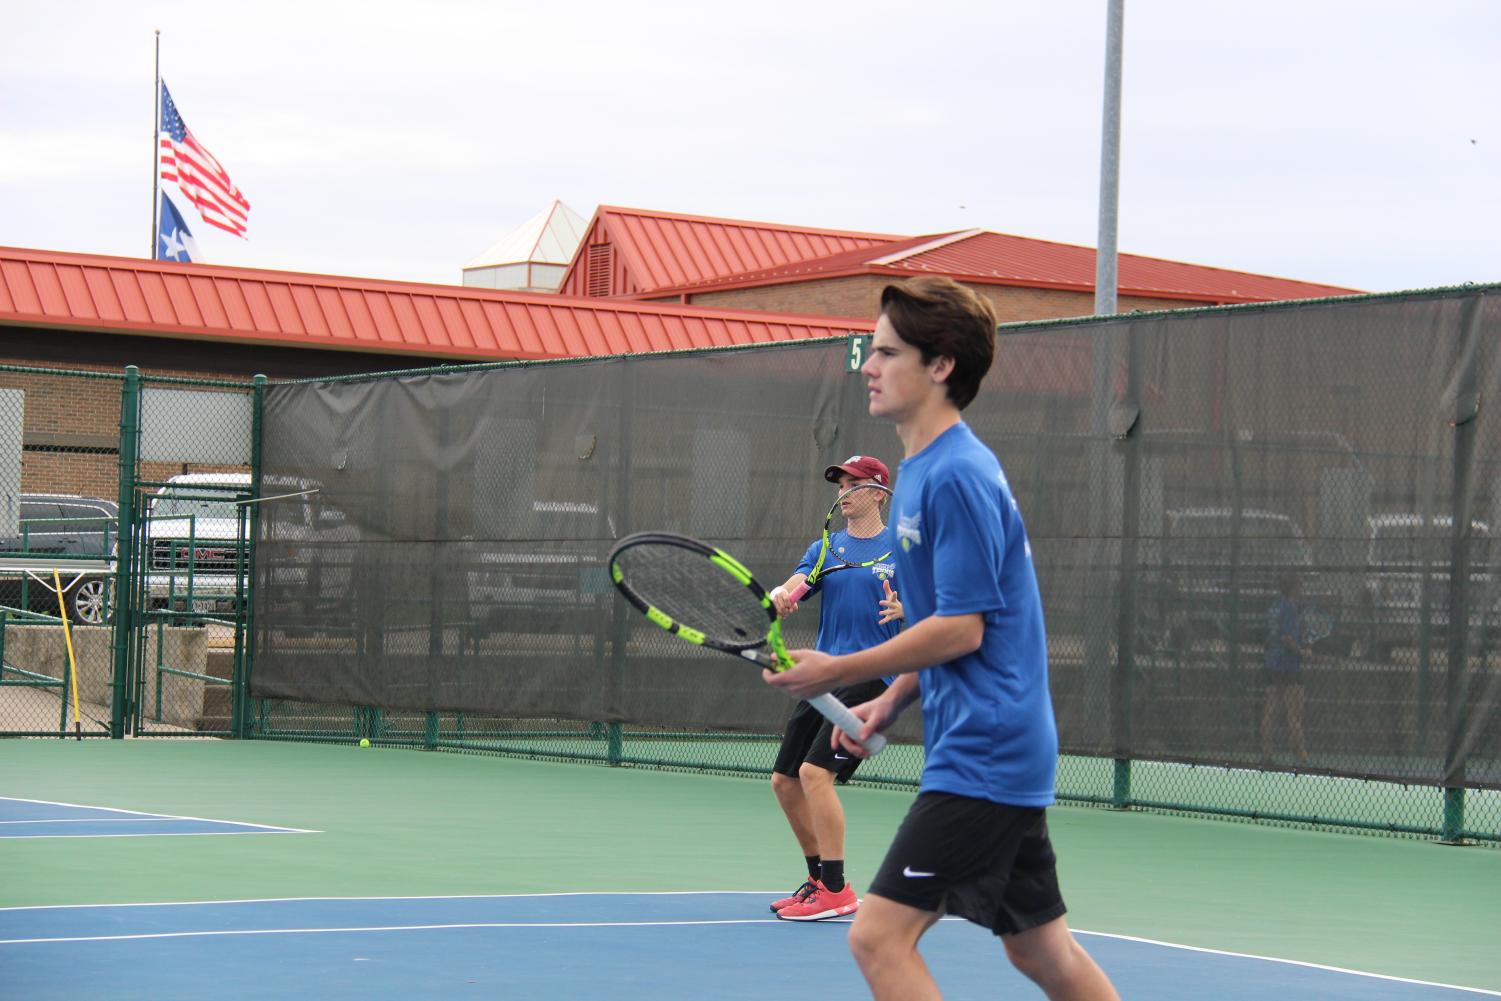 Seniors Aaron Gambrell and Brady Smith play as partners on the varsity tennis team. The team advanced to regionals.